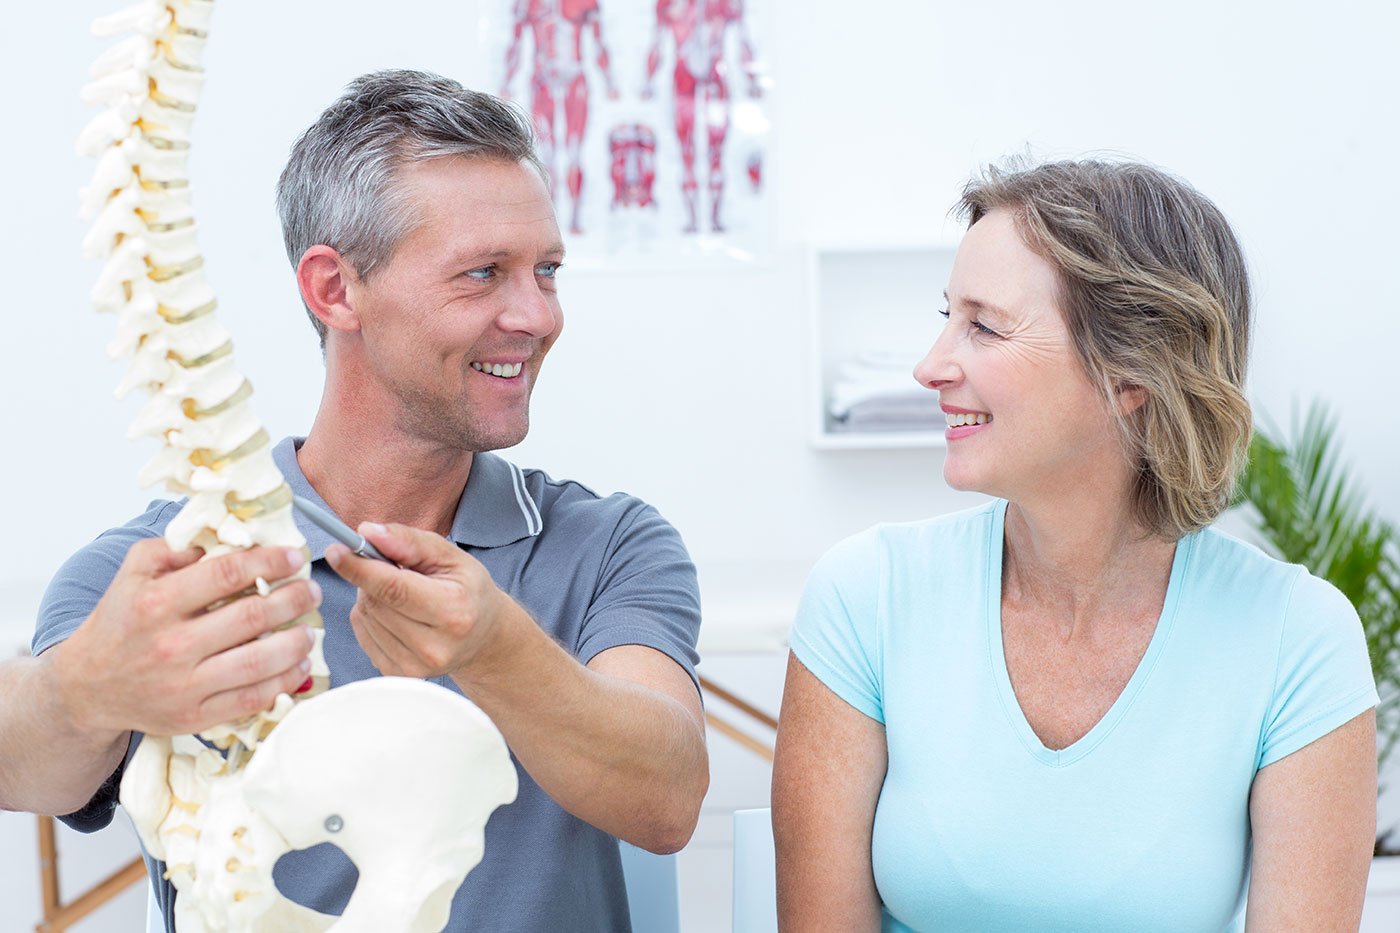 Routine chiropractic care, chiropractic consultation between male Dr. and female patient